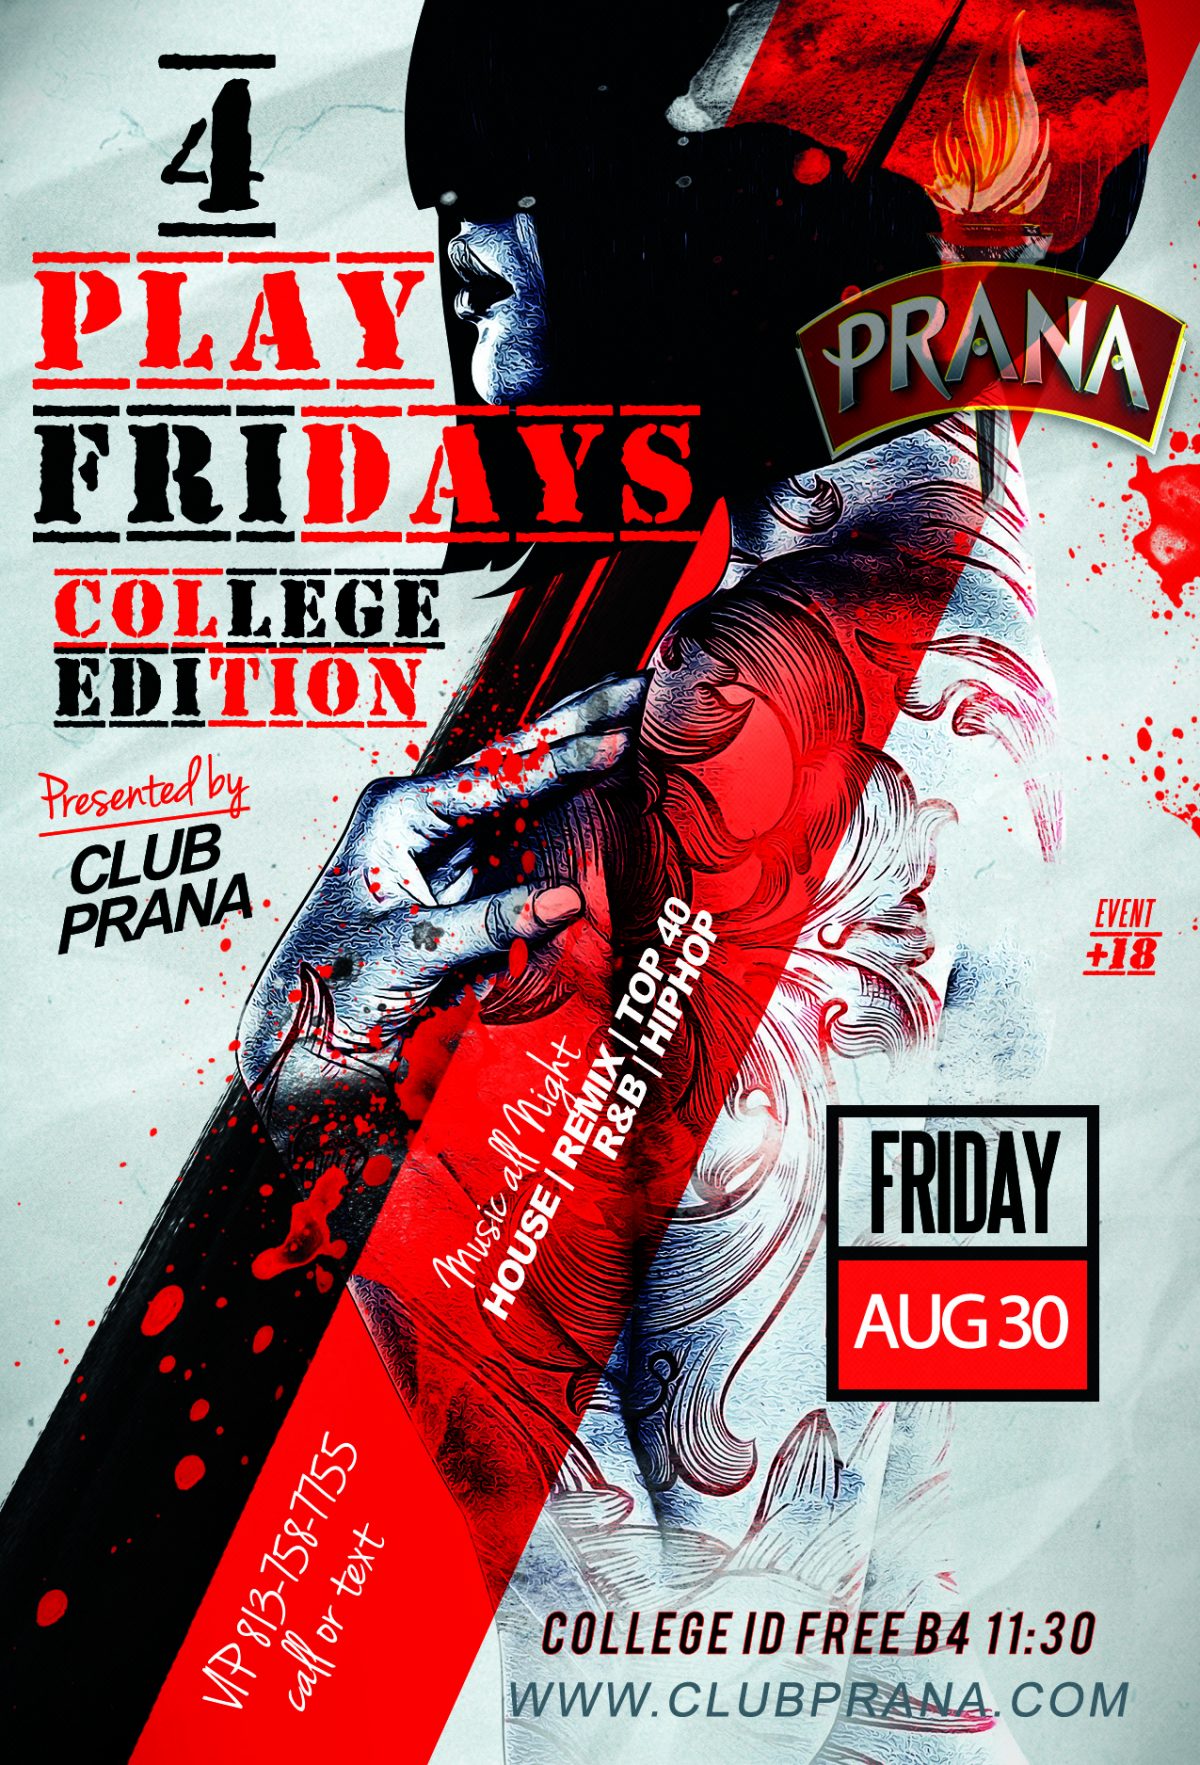 4Play Fridays College Edition